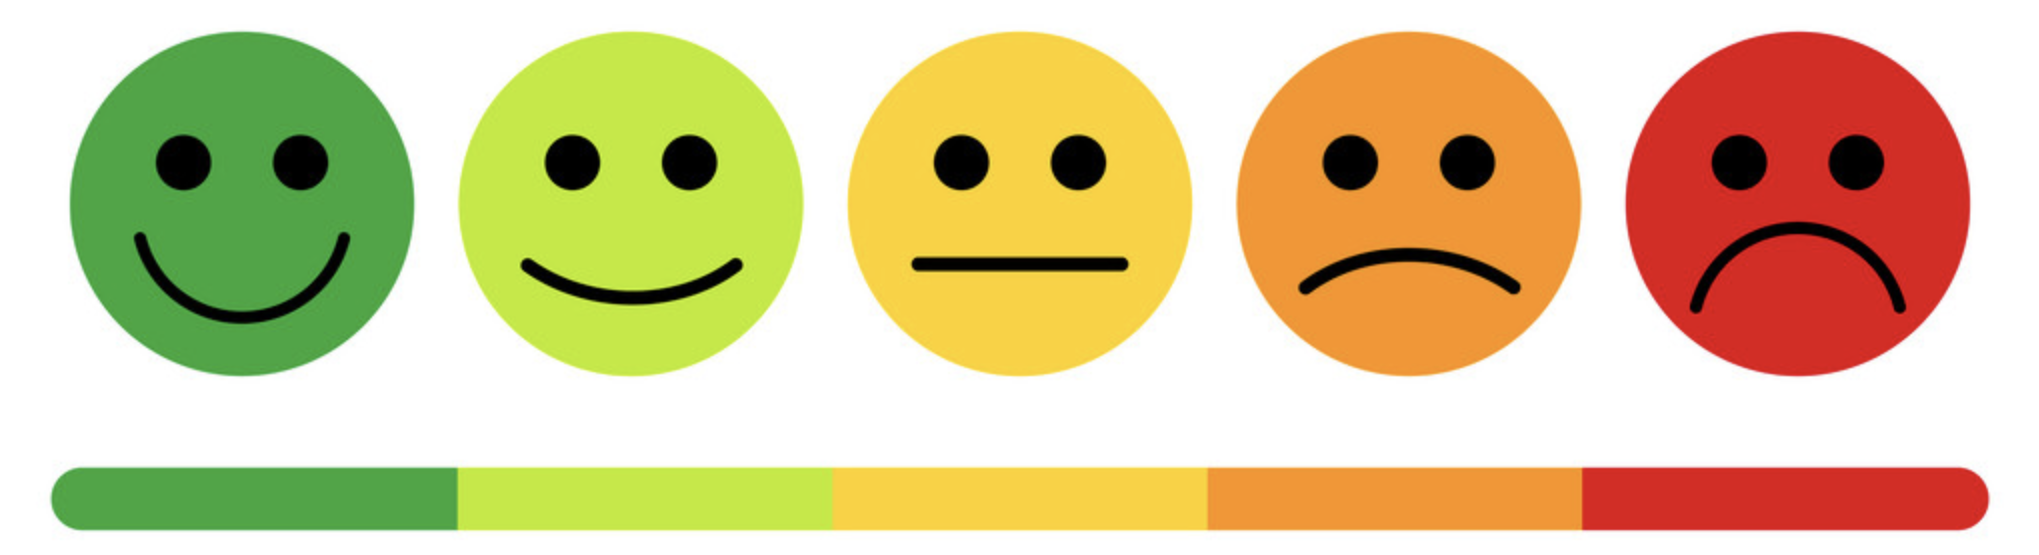 Smiley face mood scale ranging from green smiley face to red sad face